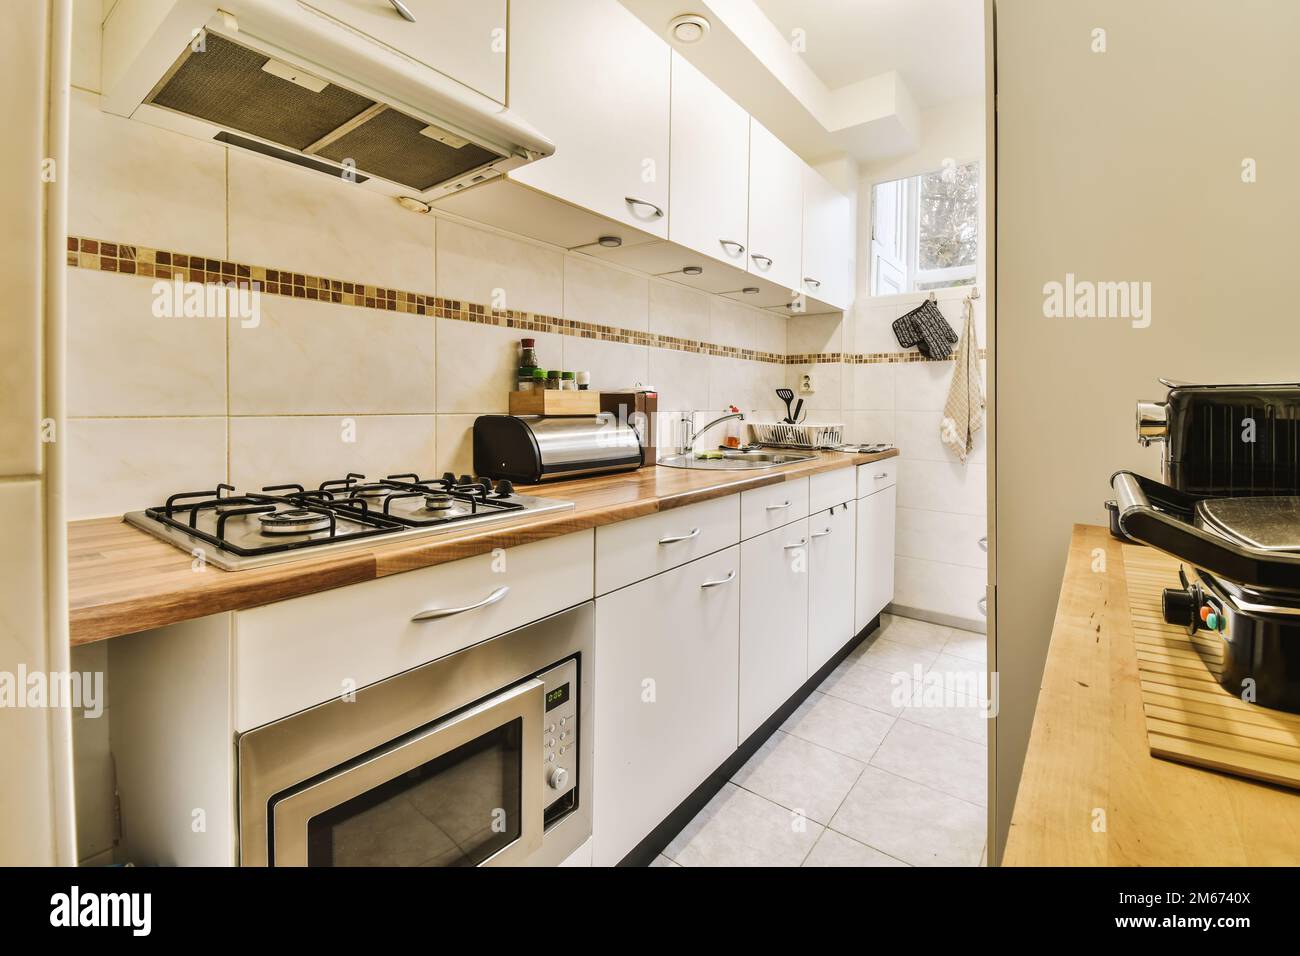 a kitchen with white cupboards and wood counter tops on the counters in this is taken from an open door Stock Photo